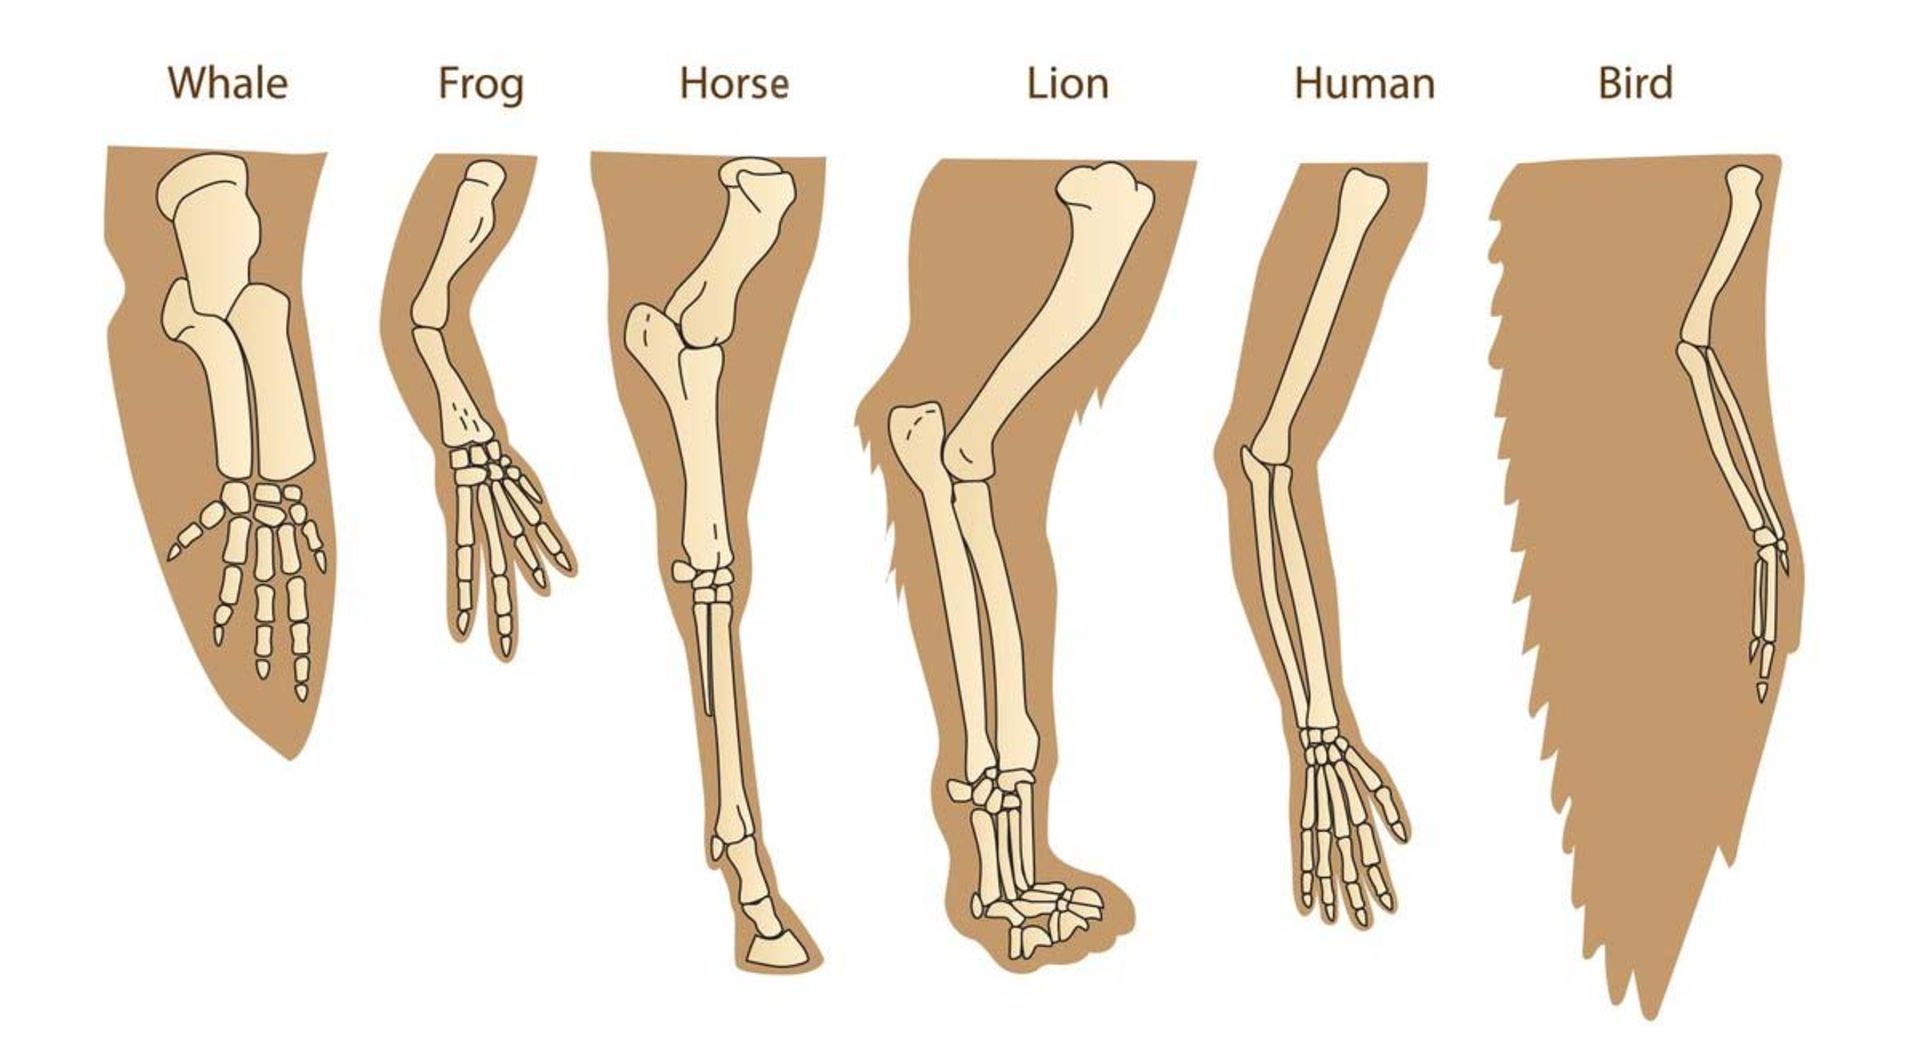 The forelimbs of mammals, including the human arm, the forelimb of a lion, the forelimb of a whale, and the wing of a bird